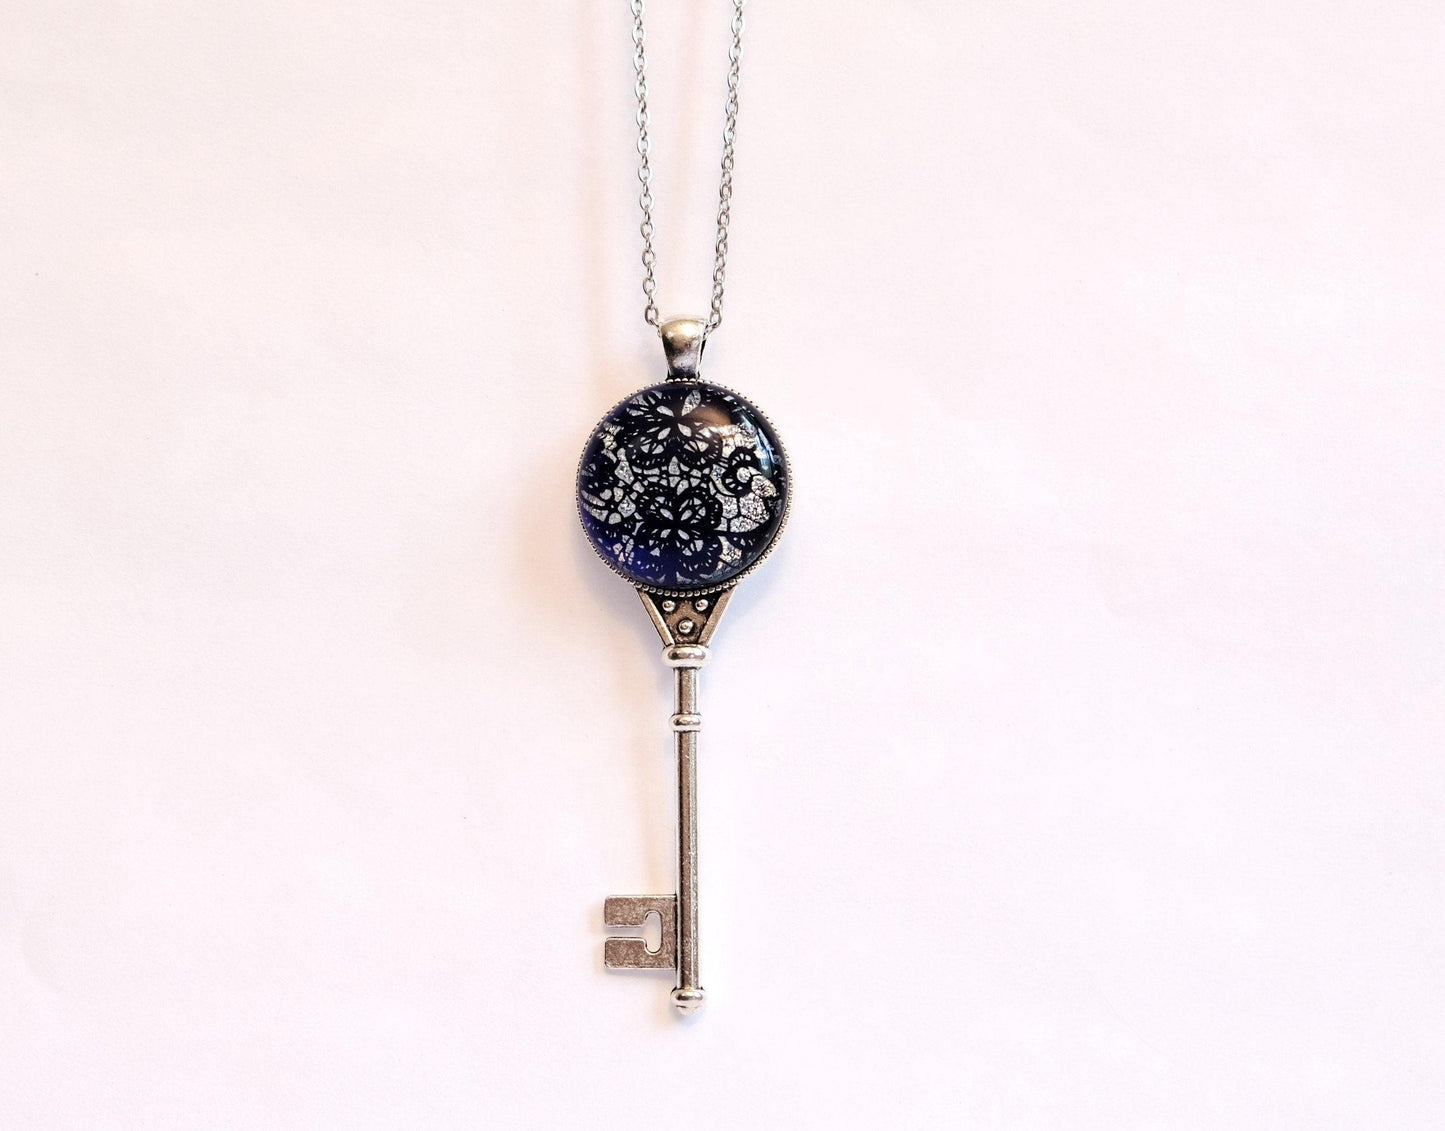 Silver tone Skeleton Key pendant necklace with Fused Glass blue and silver dichroic Lace cabochon on 24 inch steel chain jewelry